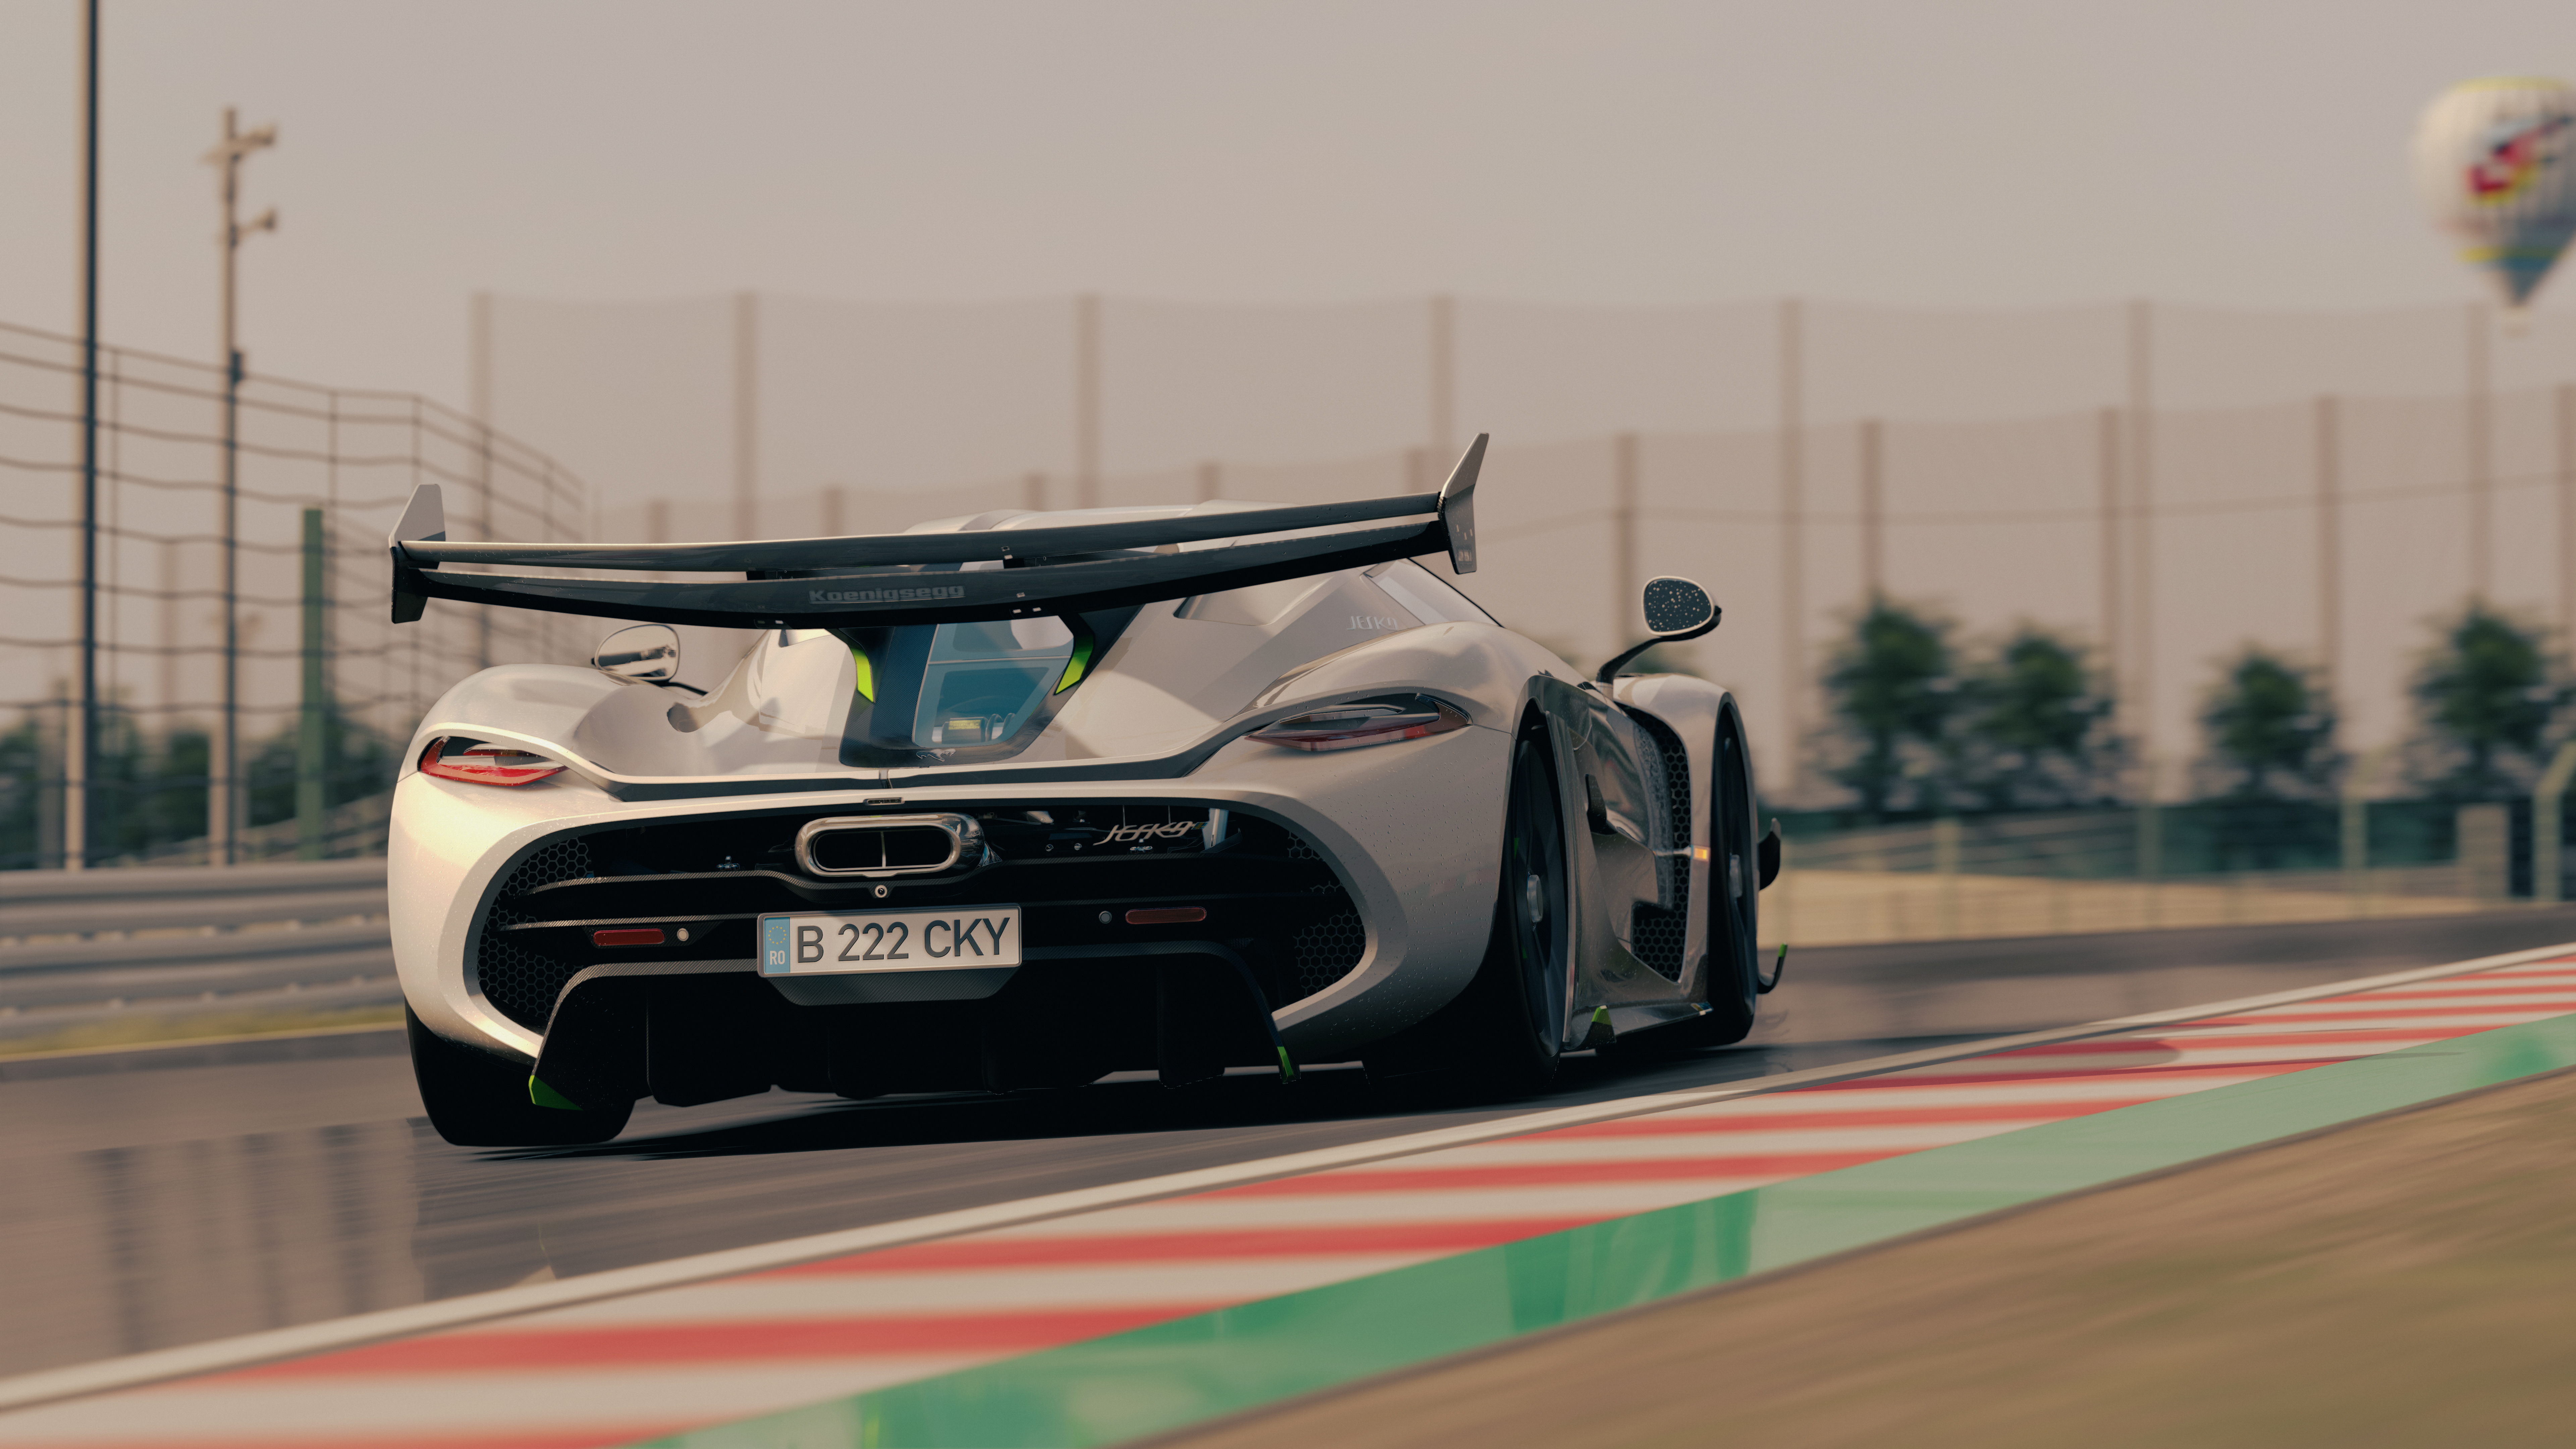 Assetto Corsa Koenigsegg Jesko Tracks PC Gaming Rear View Video Games Car Licence Plates Fence Race  7680x4320